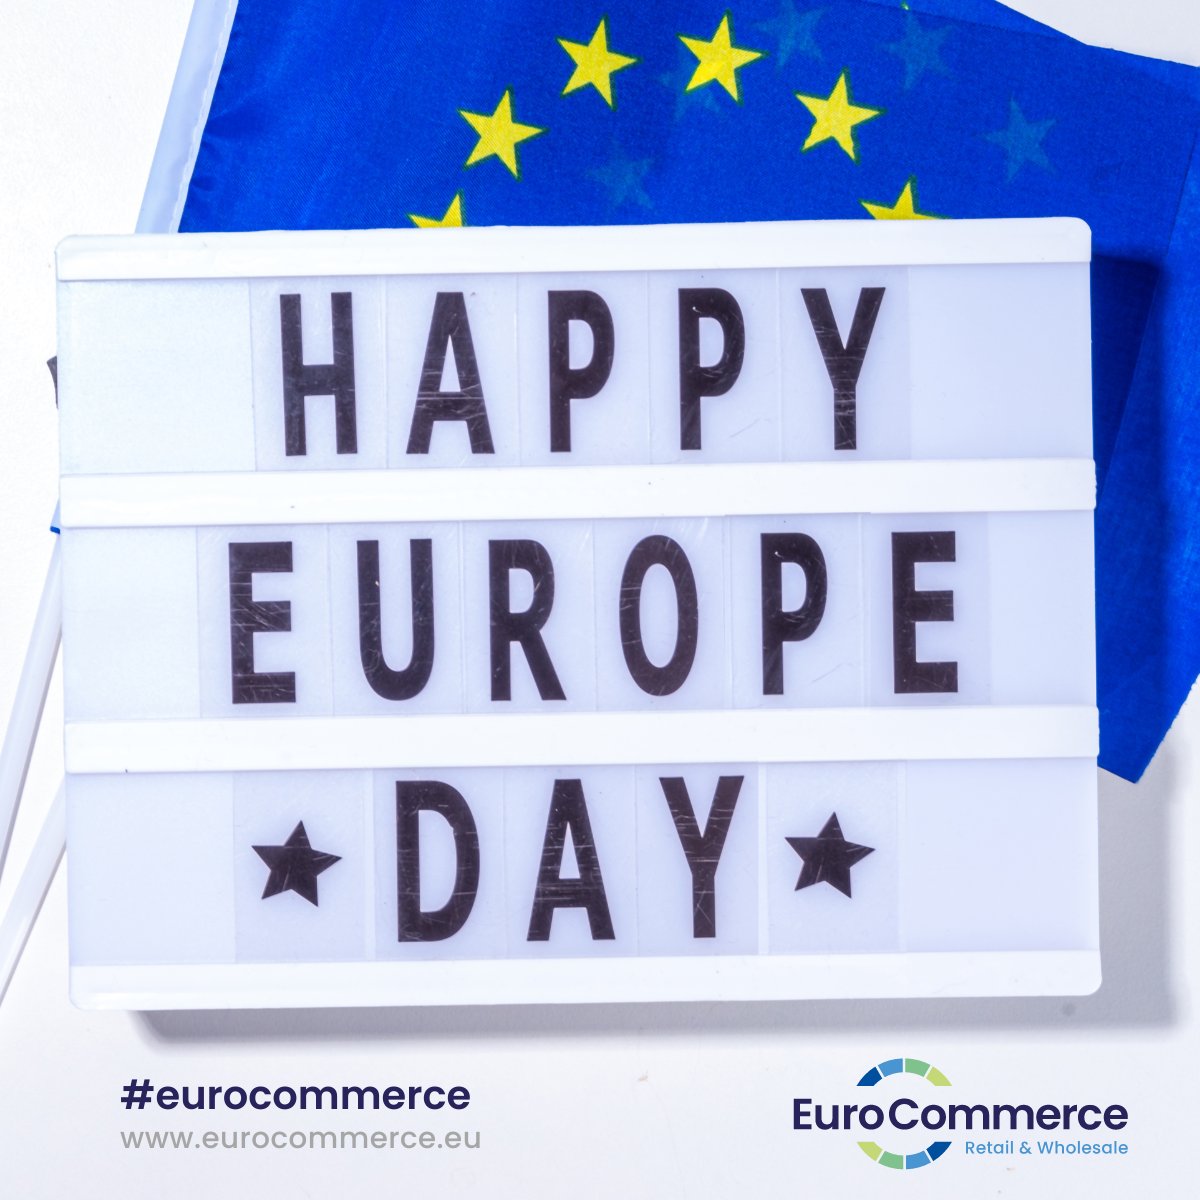 Happy #EuropeDay! 🇪🇺 Yesterday we honoured Robert Schuman's visionary dream of a united, peaceful and prosperous Europe. Let's celebrate the achievements of those dedicated to our Union, whether dreamers or builders. Together, our strength lies in unity. 🌍✨